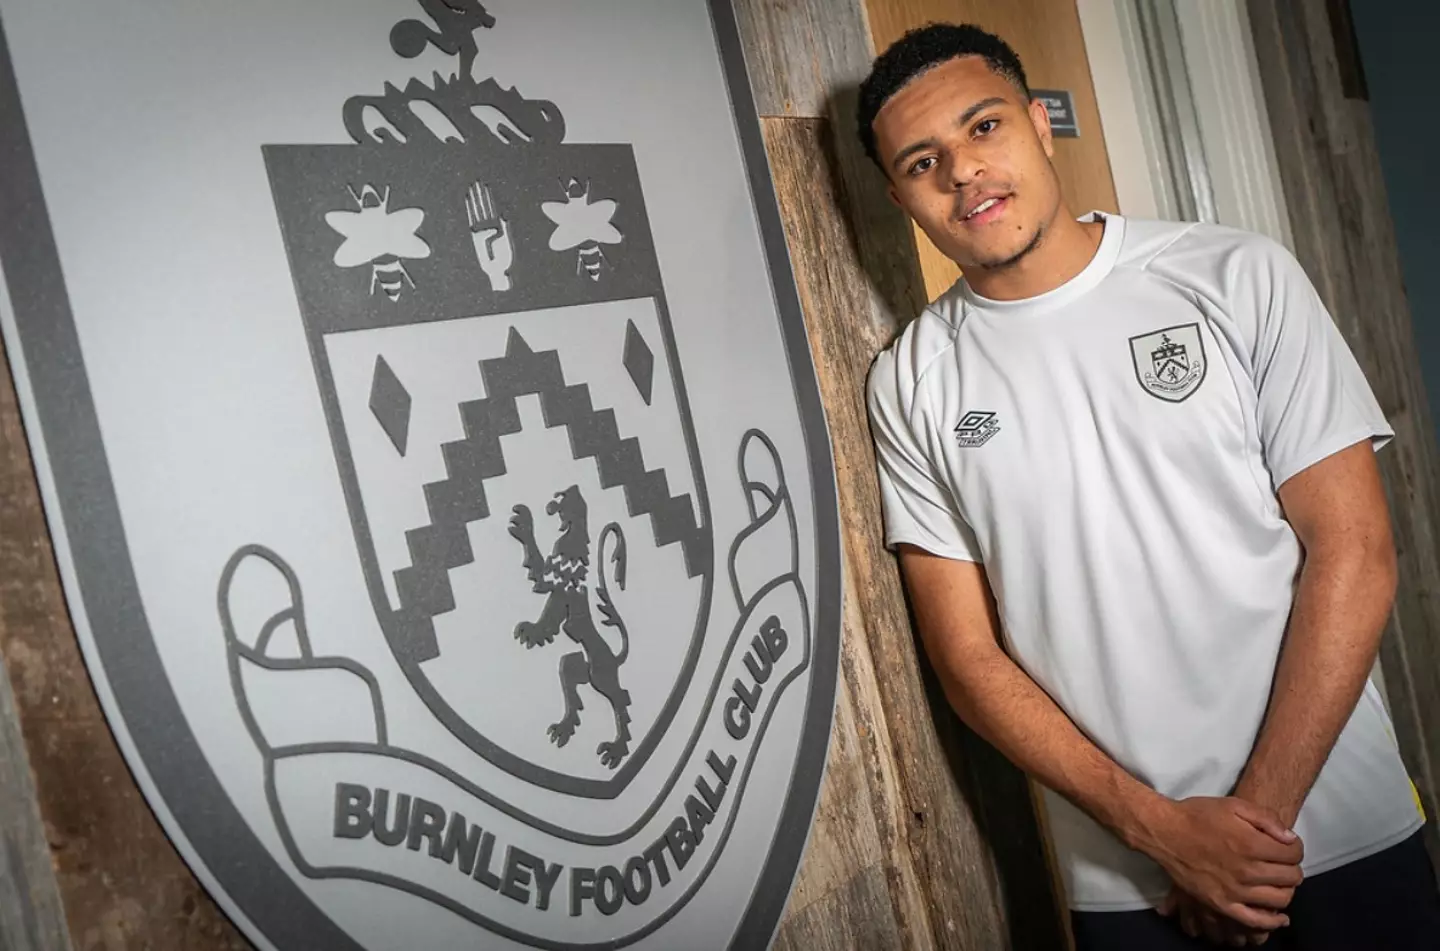 CJ Egan-Riley has joined forces with former Manchester City captain Vincent Kompany at Turf Moor (Image: burnleyfootballclub.com) 